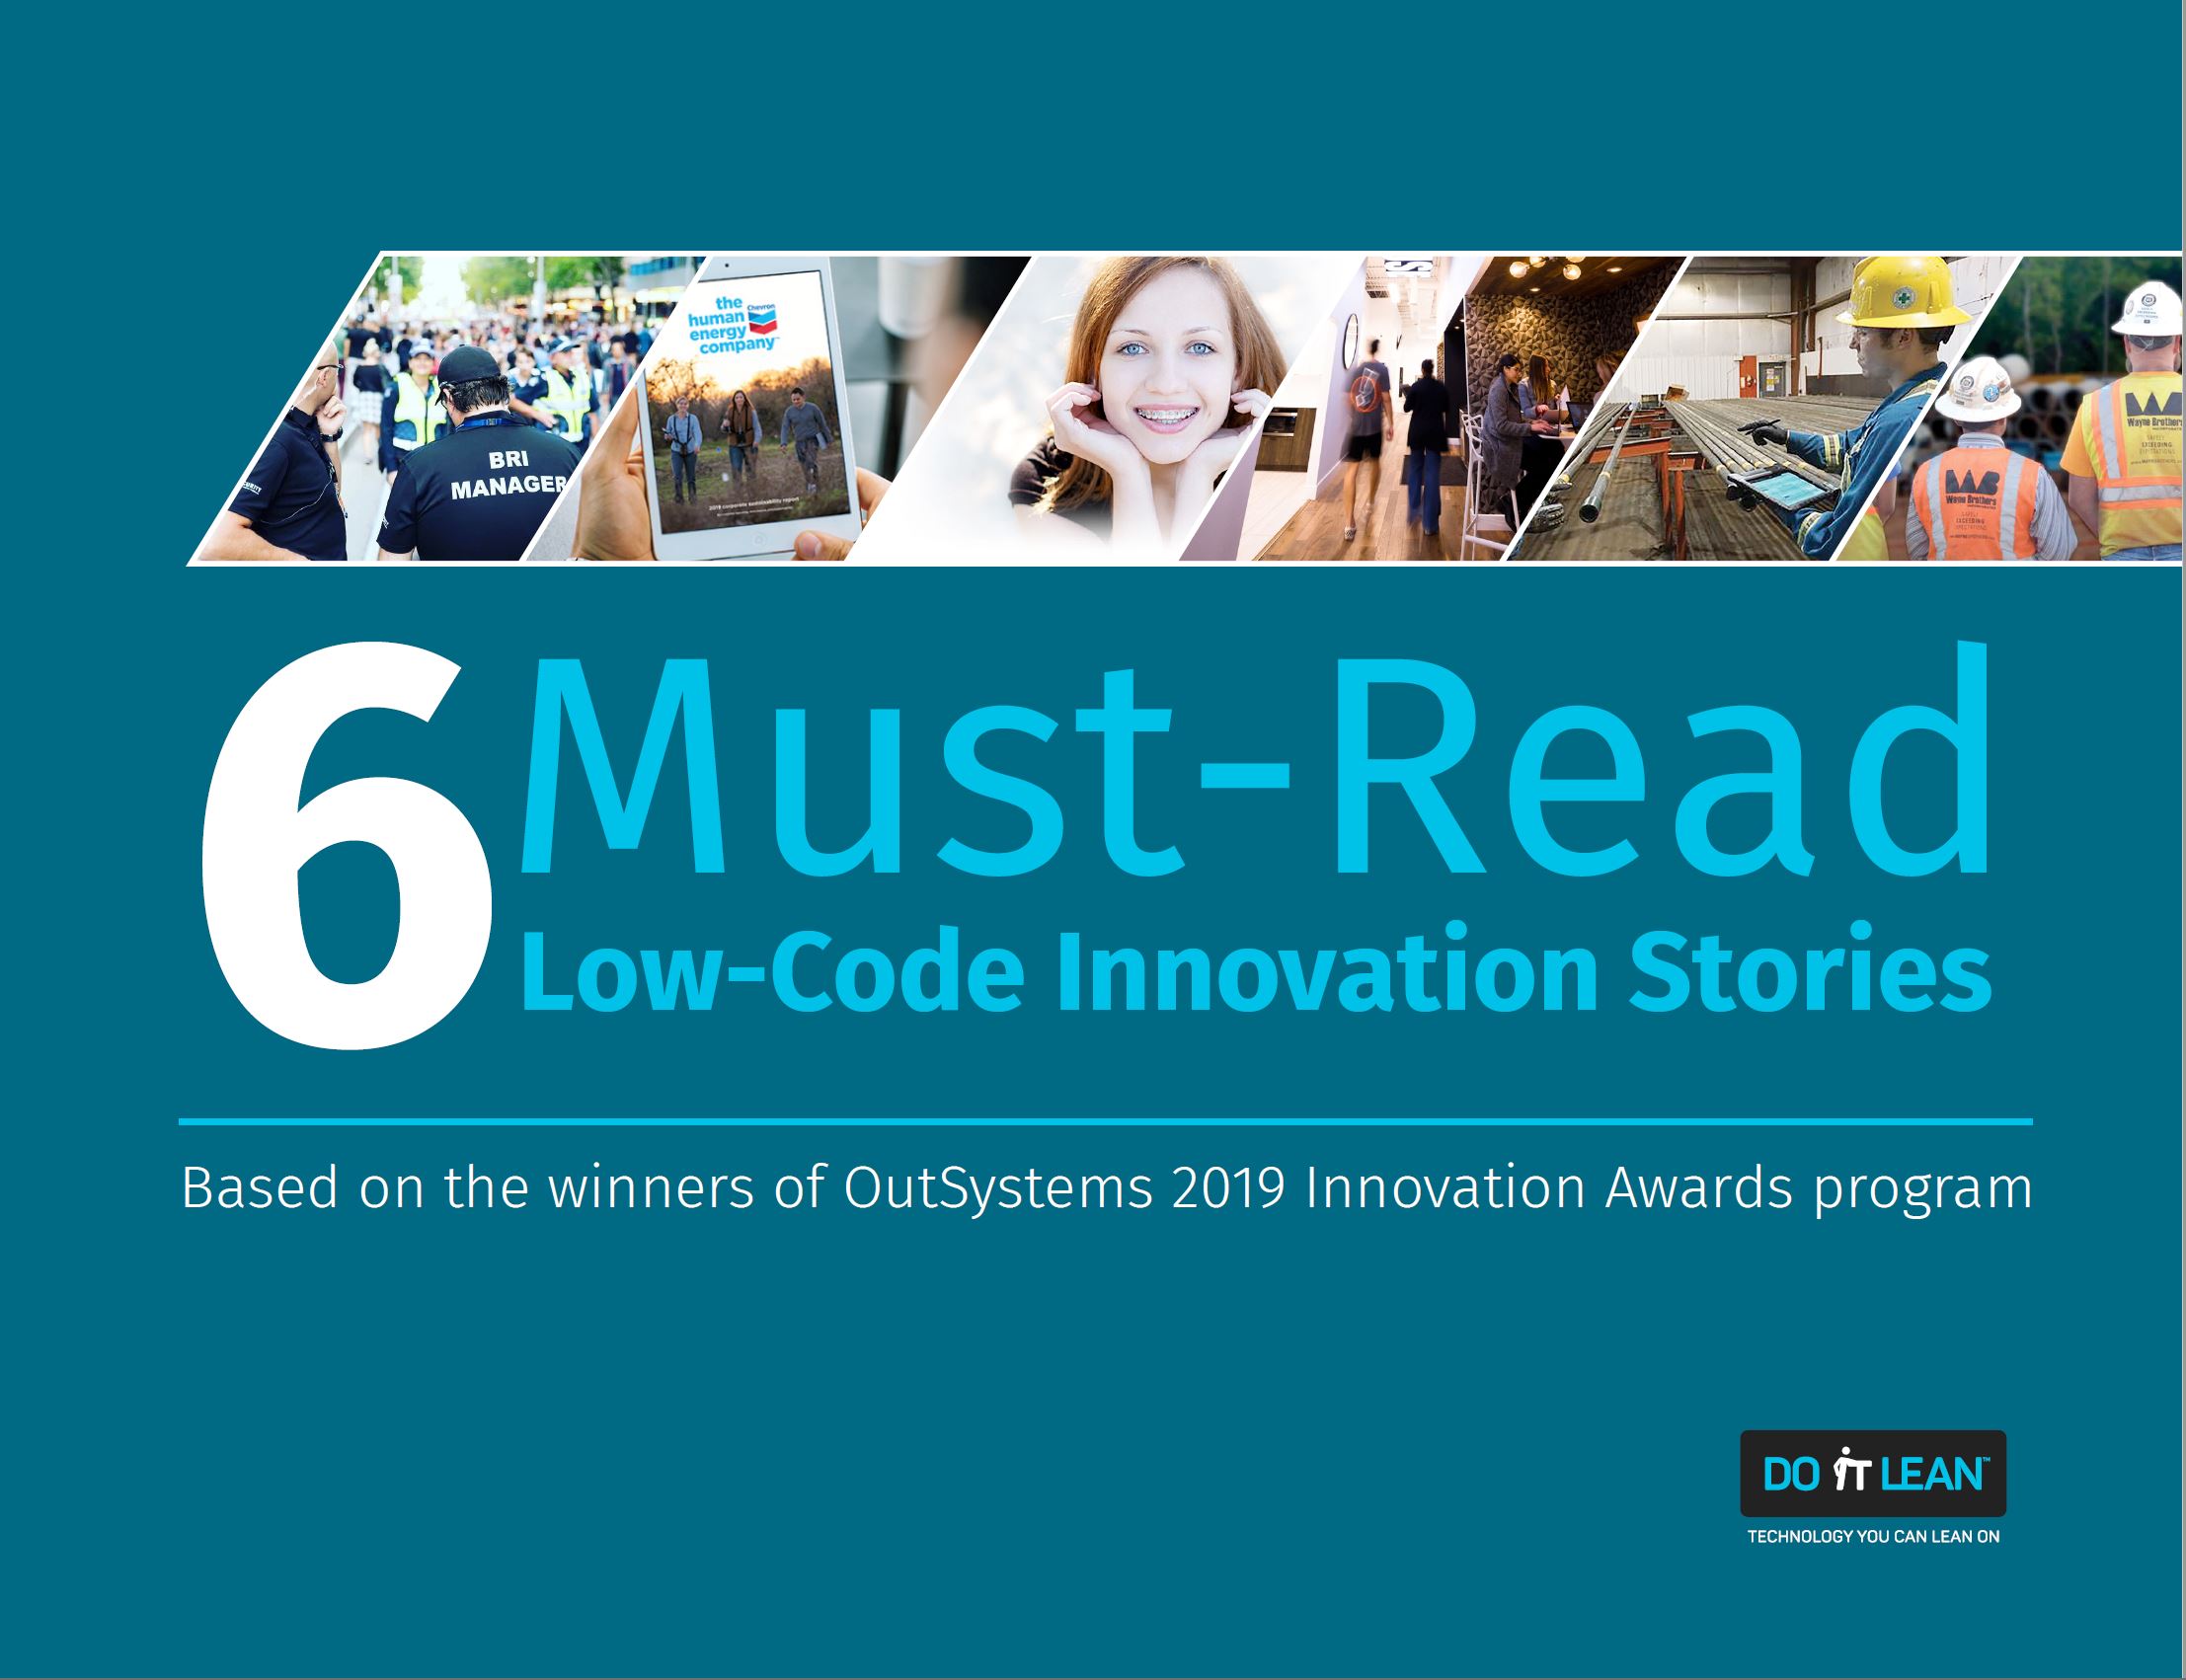 6 Must-Read Low-Code Innovation Stories, Outsystems/Do IT Lean